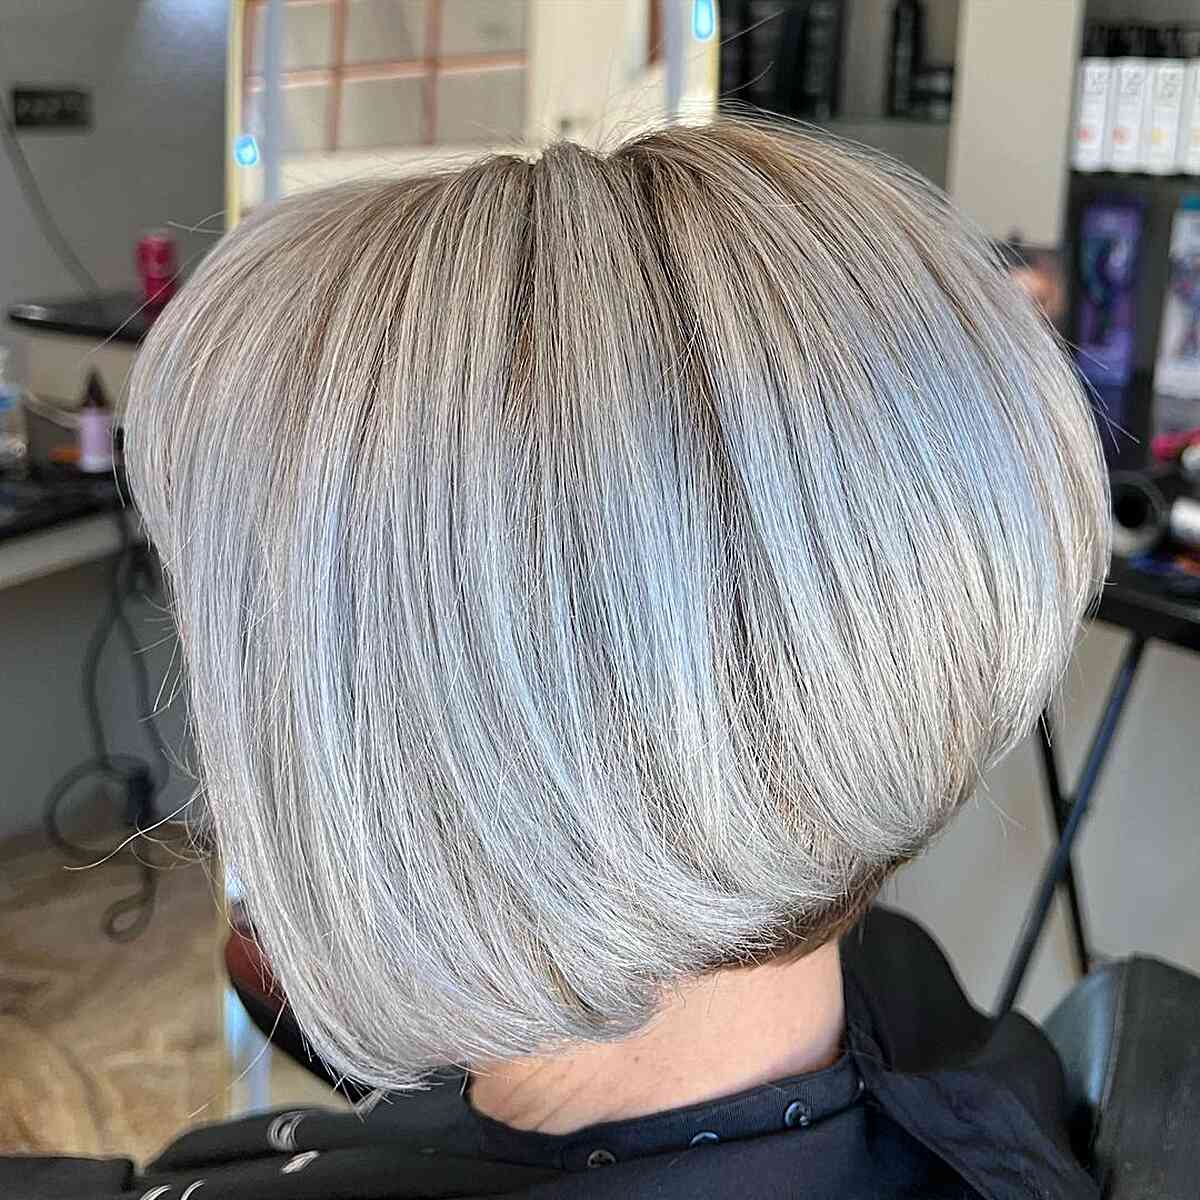 Short Wedge Cut with Silver Blonde Highlights for older ladies